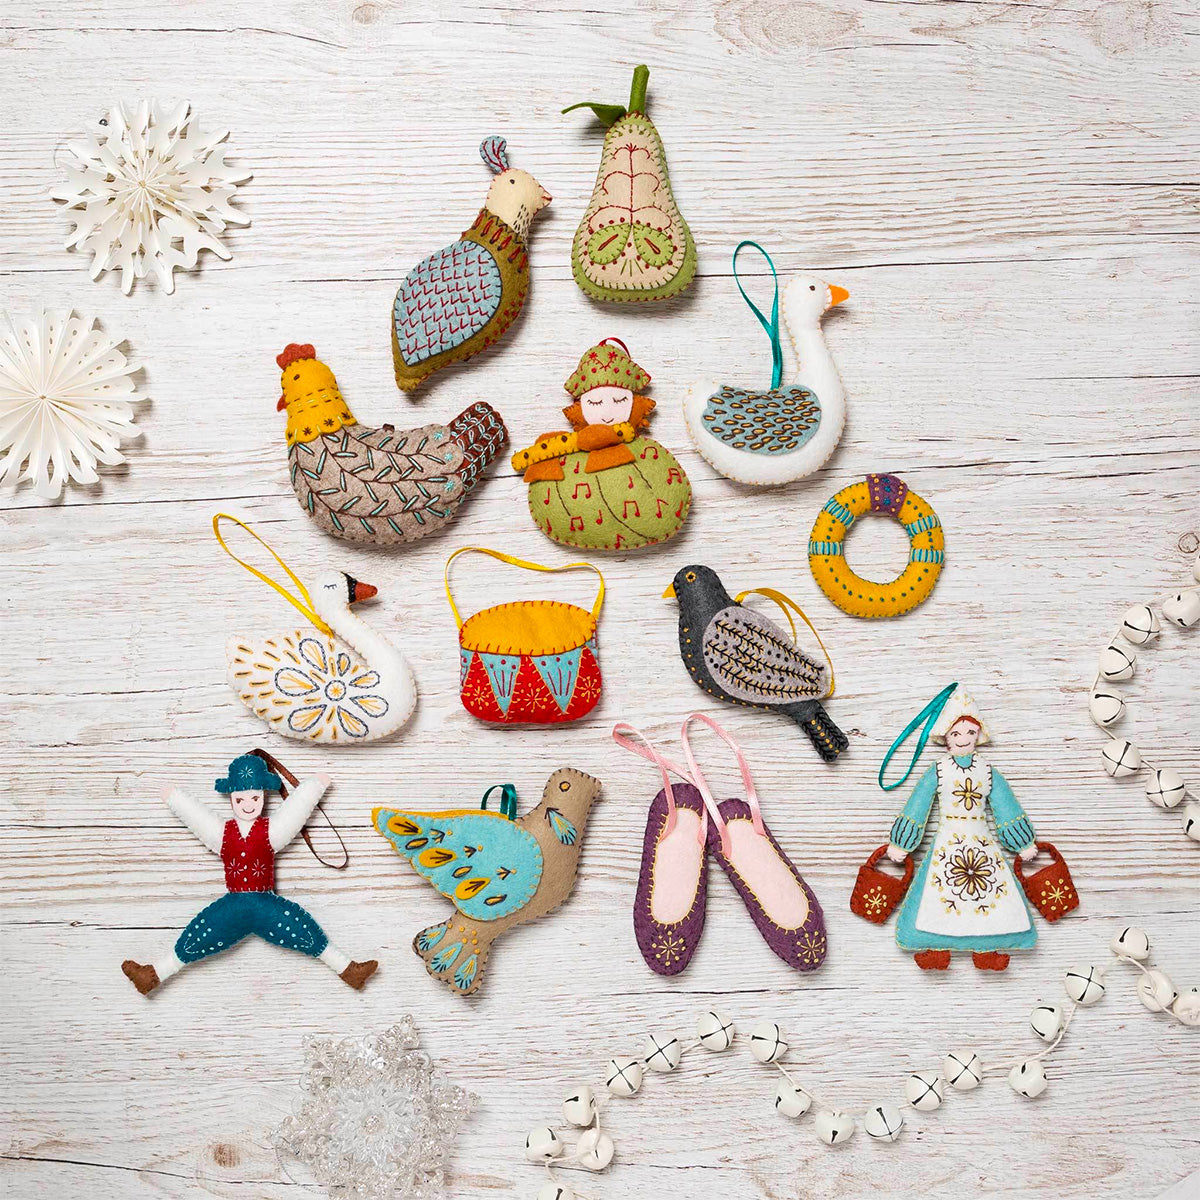 12 Days of Christmas Felt Ornament Kit - Lord-a-Leaping